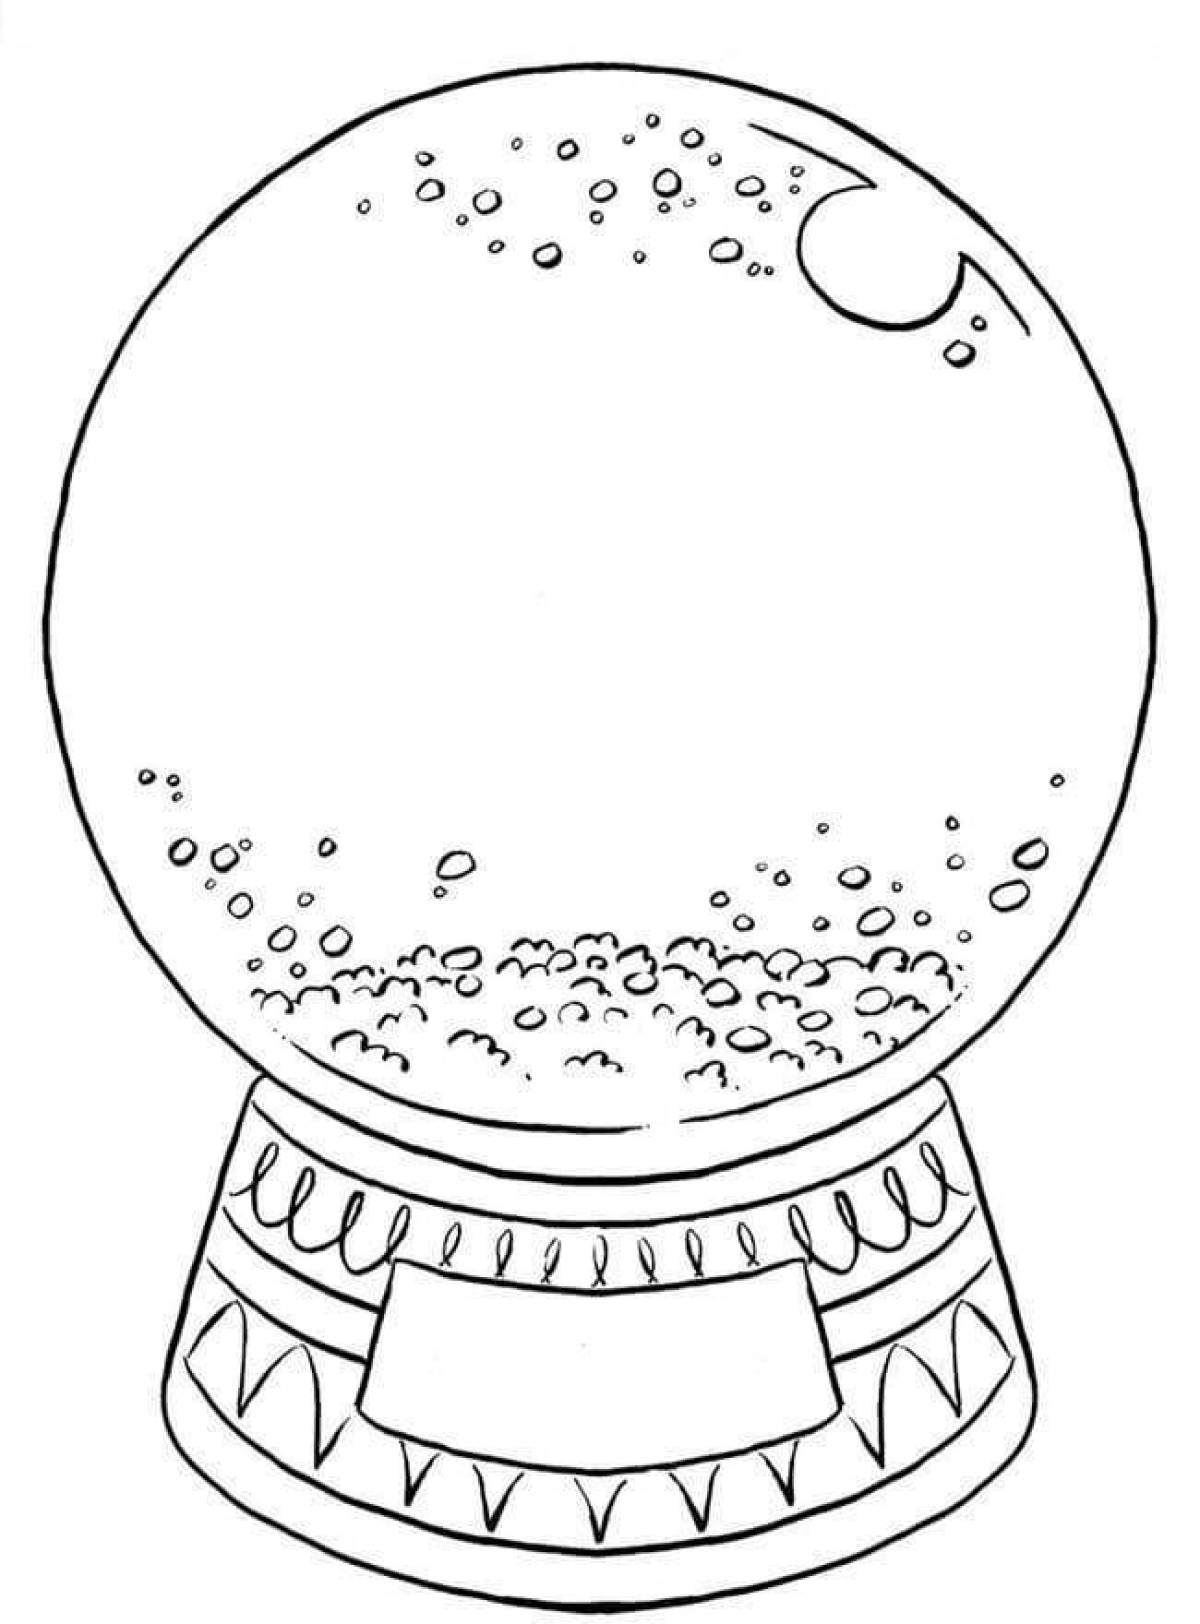 Funny snowball coloring book